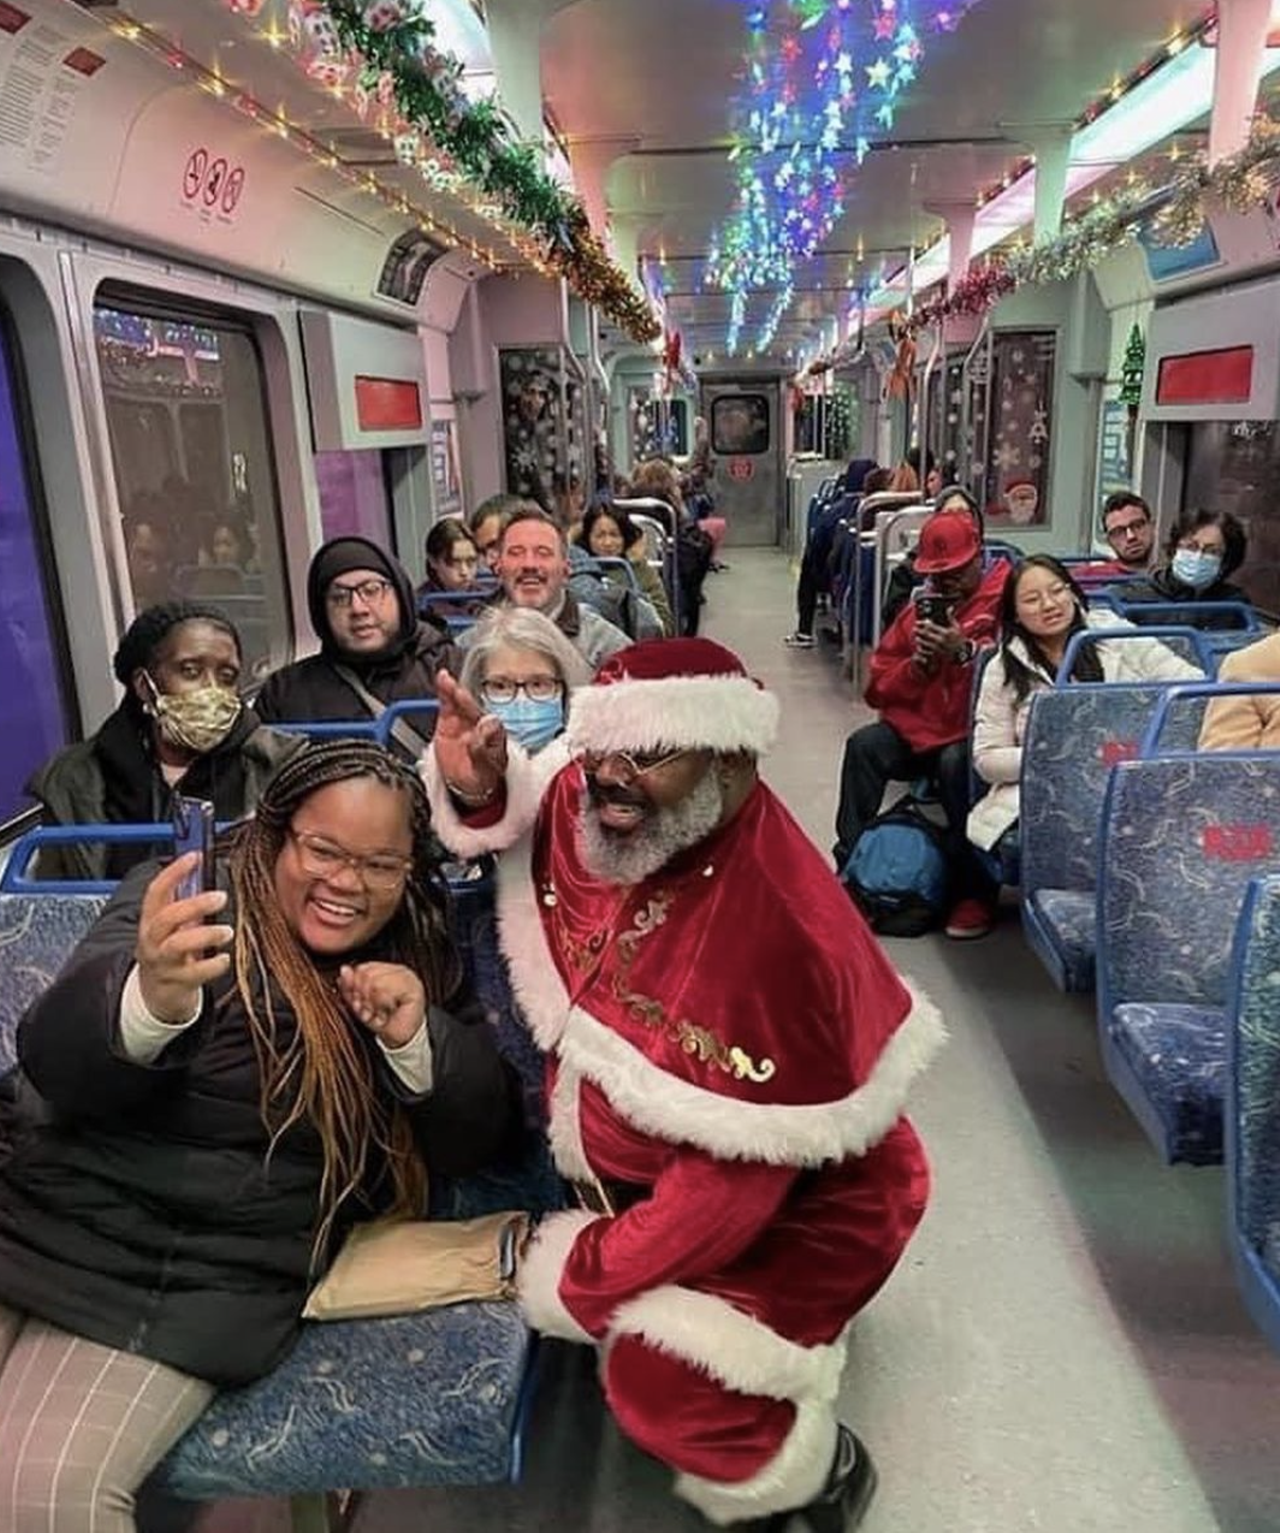 Ride or Visit the RTA’s Holiday Car
The RTA’s Holiday Car always gets us in the mood for the holiday season. You can plan your trip here, or visit the car at one of the stops it’ll be making around town, like the La Gran Parranada (4346 Ridge Rd., Brookyln, 12/16 6-9 p.m.) or Season’s Greetings from Shaker Square (13224 Shaker Blvd., 12/17, 2-6 p.m.).